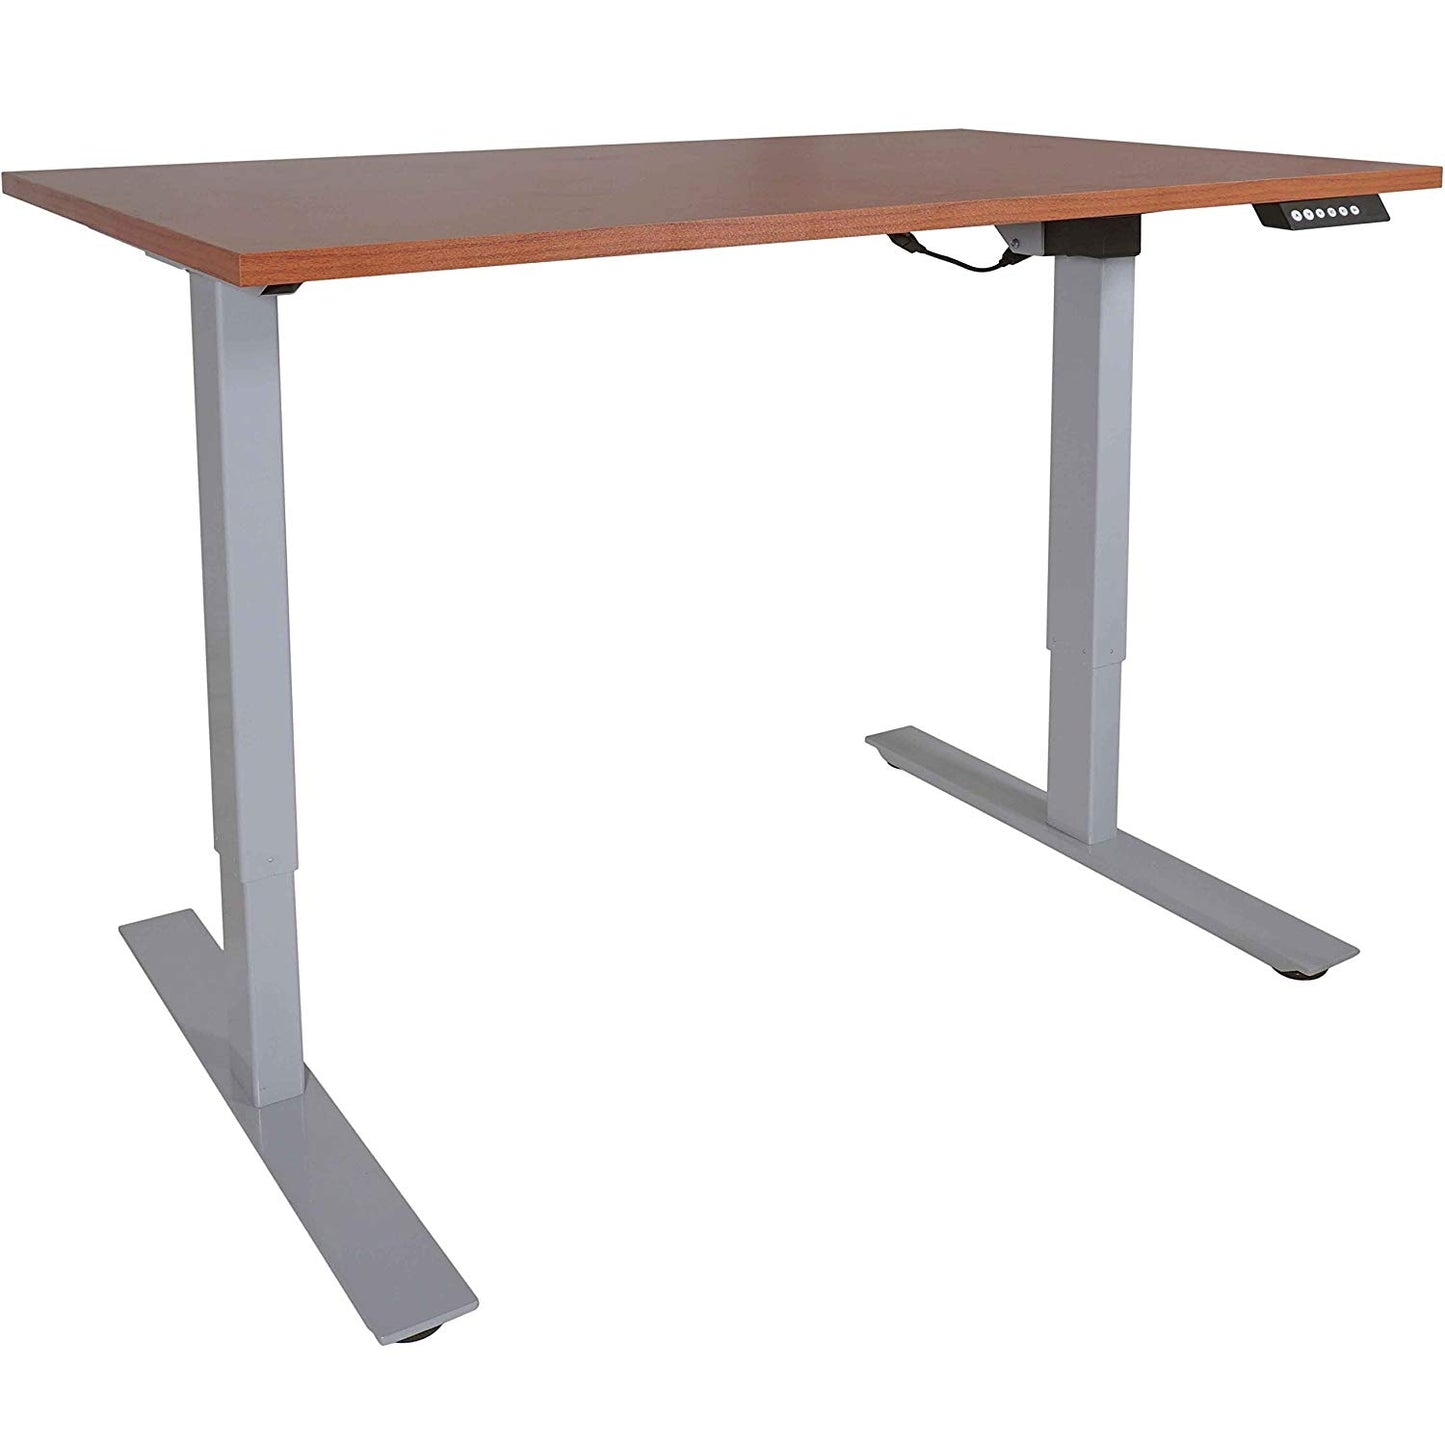 A2 Single Motor Sit To Stand Desk W/ Wood 30" X 60" Top - view 1